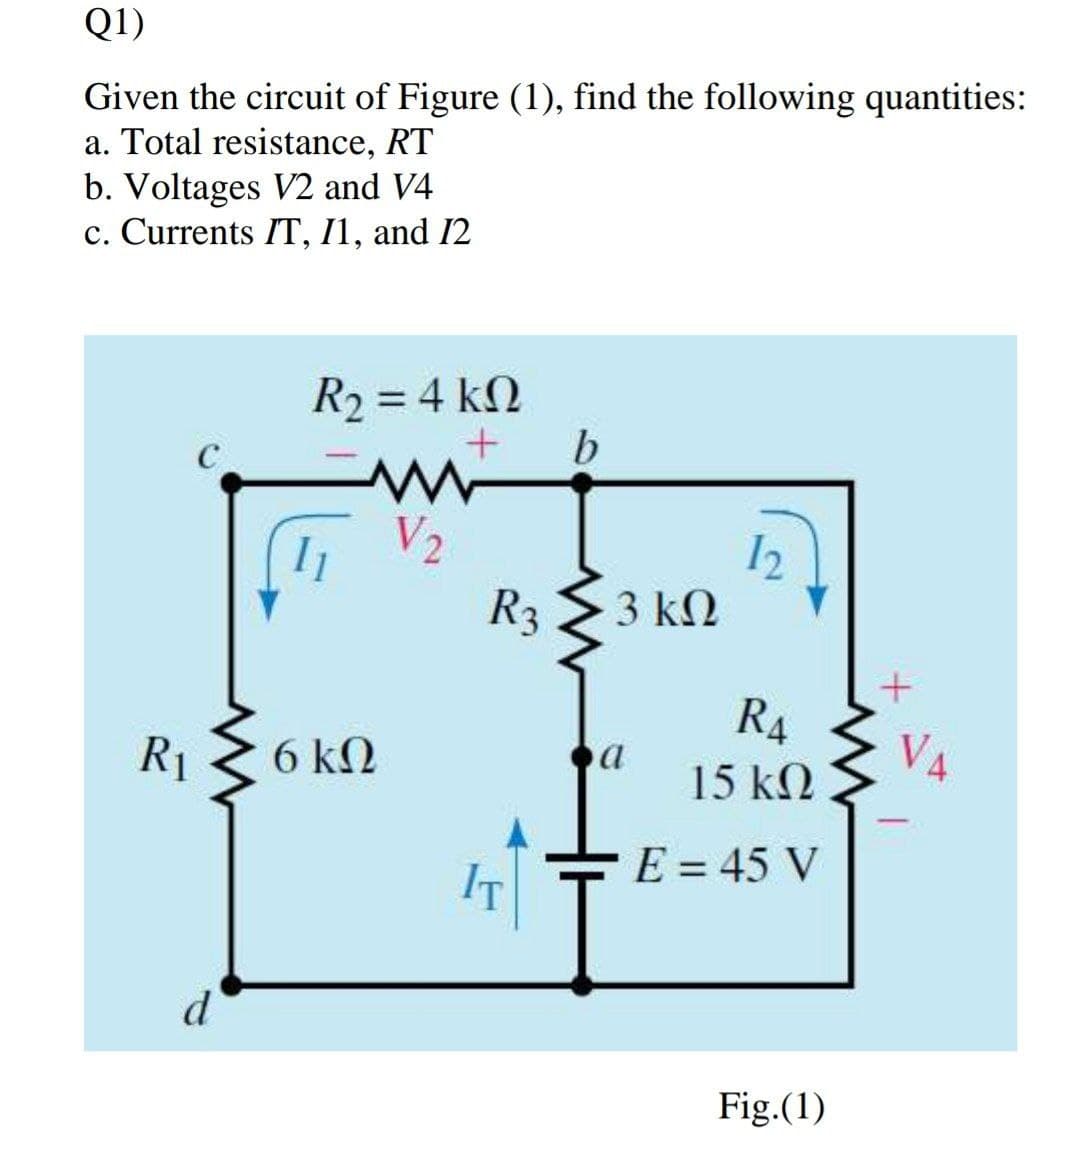 Q1)
Given the circuit of Figure (1), find the following quantities:
a. Total resistance, RT
b. Voltages V2 and V4
c. Currents IT, I1, and I2
R2 = 4 kN
b
12
R3
3 kN
R4
VA
R1
6 k2
15 kN
E = 45 V
IT
d
Fig.(1)
2.
